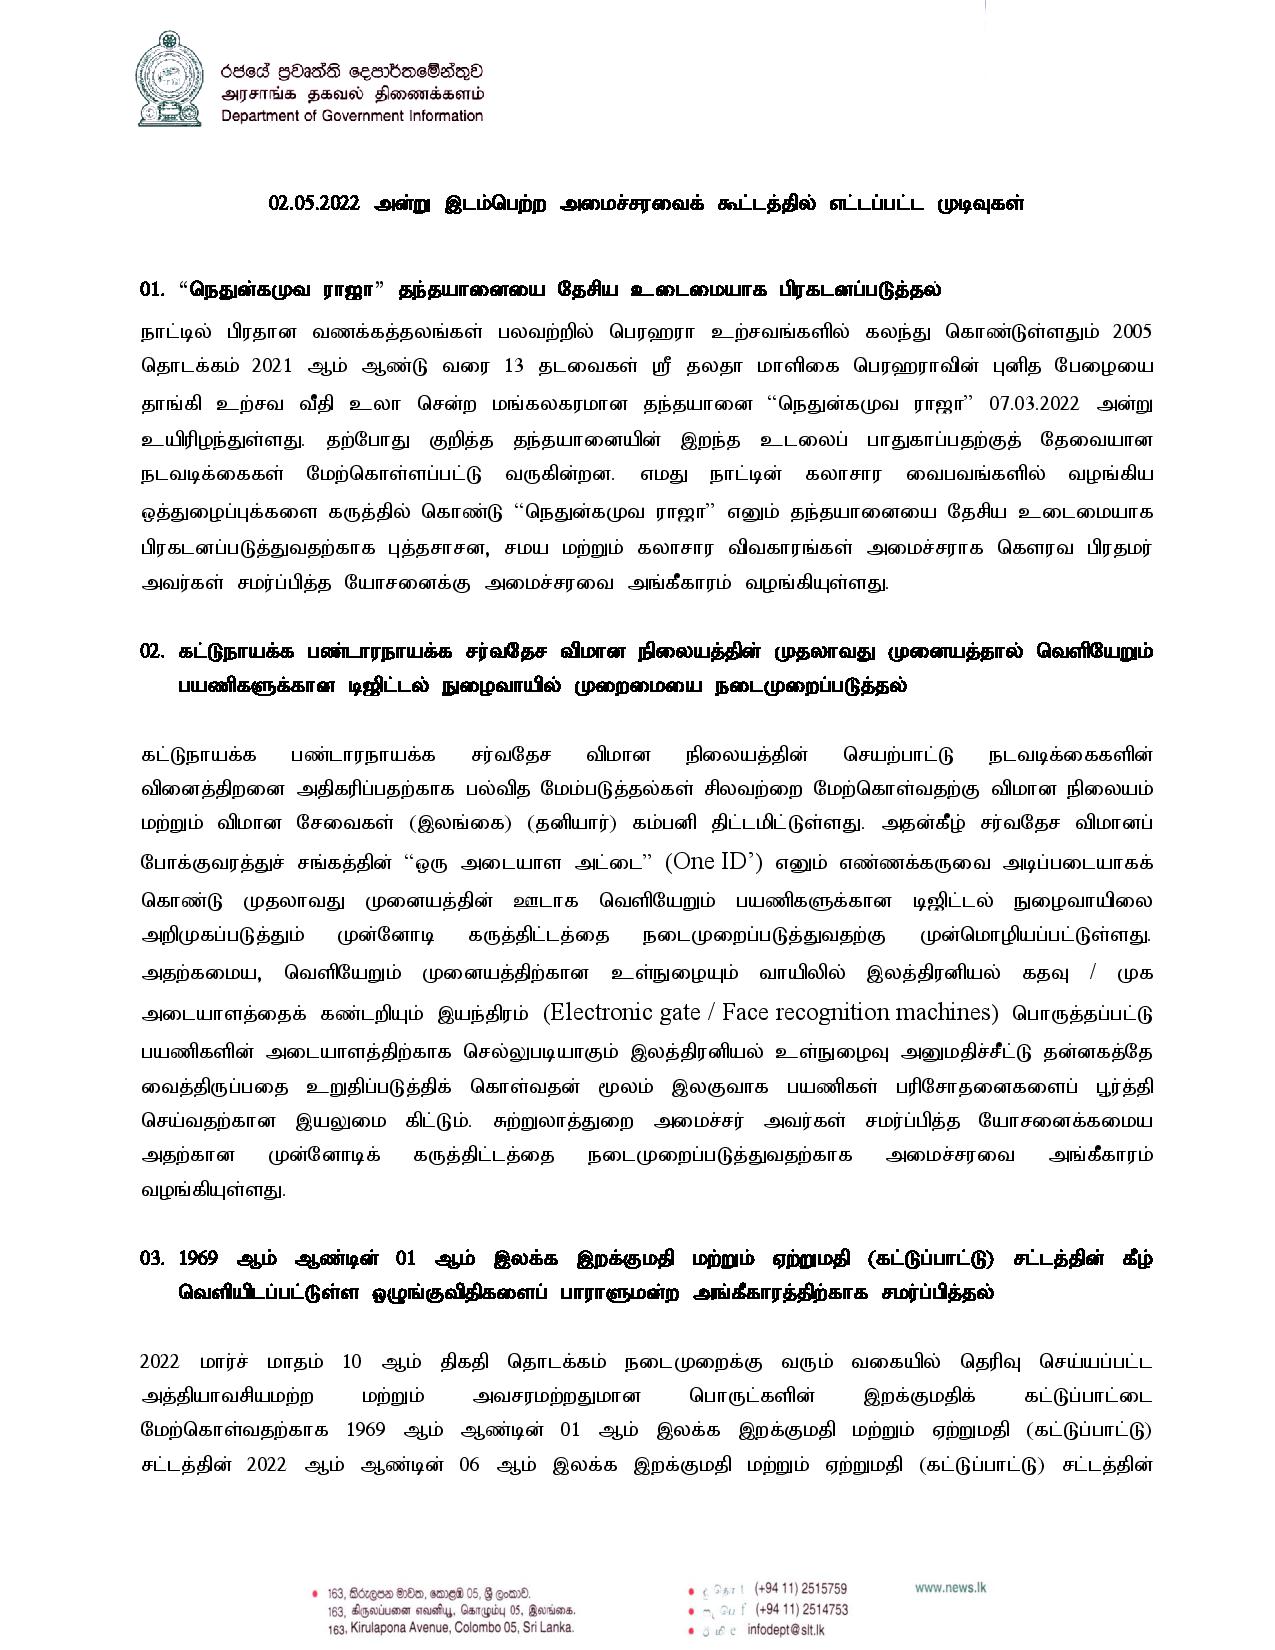 Cabinet Decisions on 02.05.2022 Tamil page 001